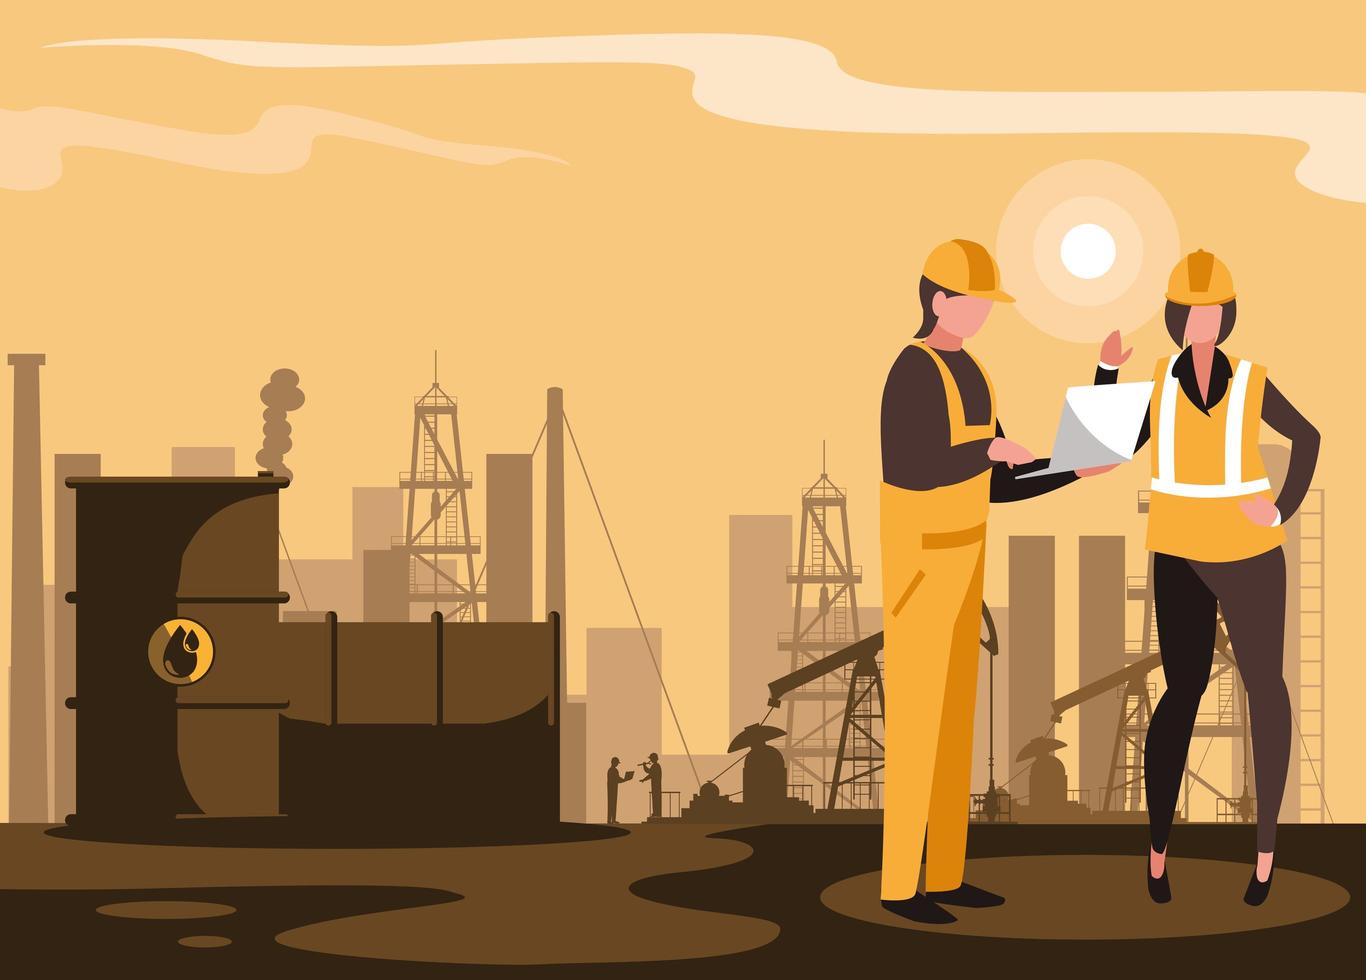 Oil industry scene with plant pipeline and workers vector